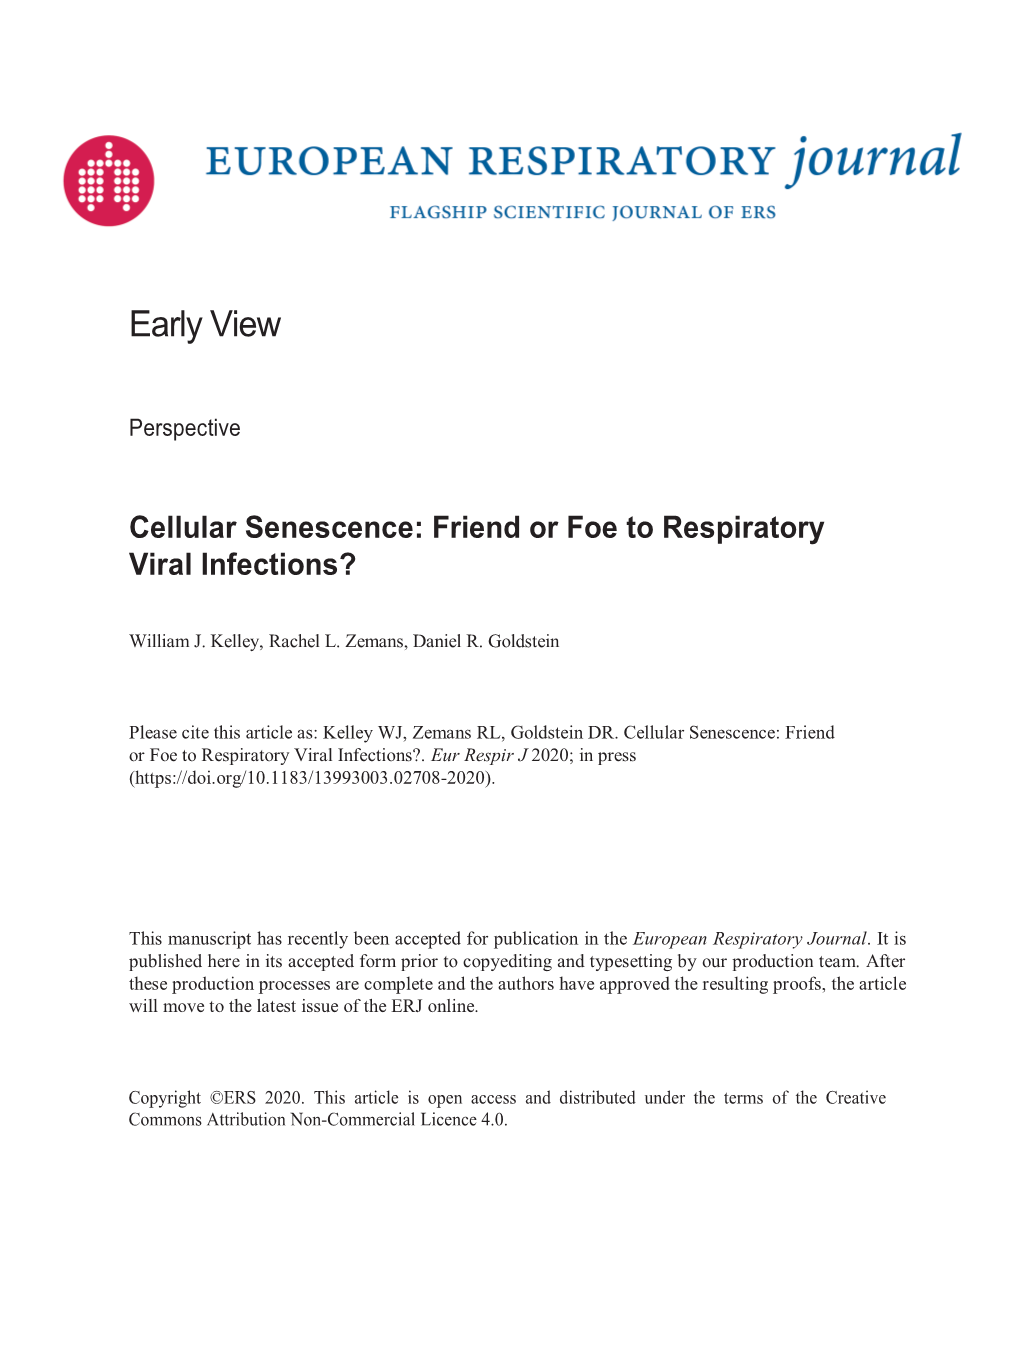 Cellular Senescence: Friend Or Foe to Respiratory Viral Infections?